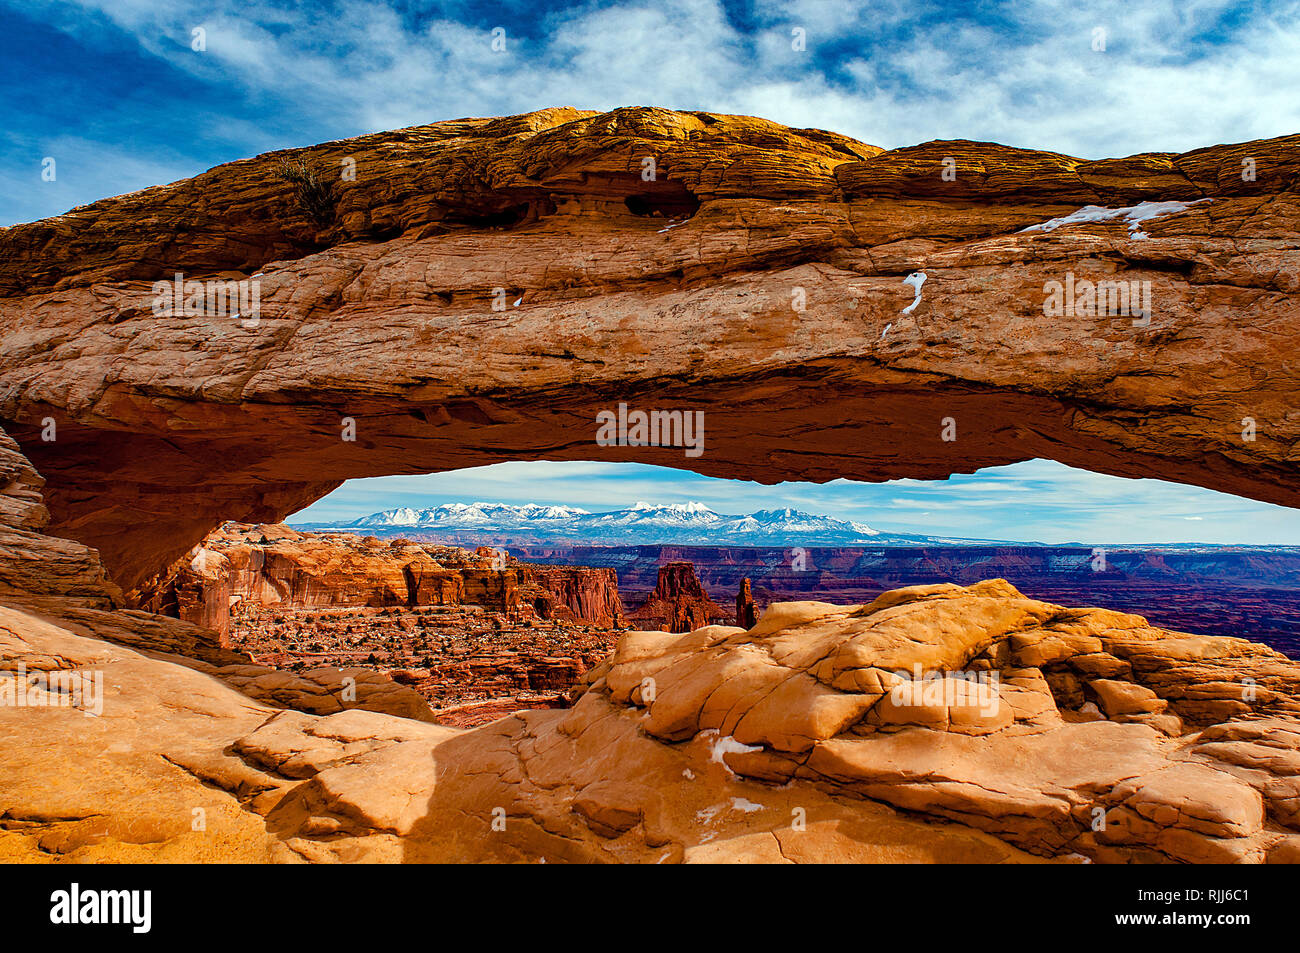 January 2019: Canyonlands National Park's Mesa Arch provides a beautiful sandstone frame for the snowcapped La Sal Mountains near Moab, Utah. Stock Photo